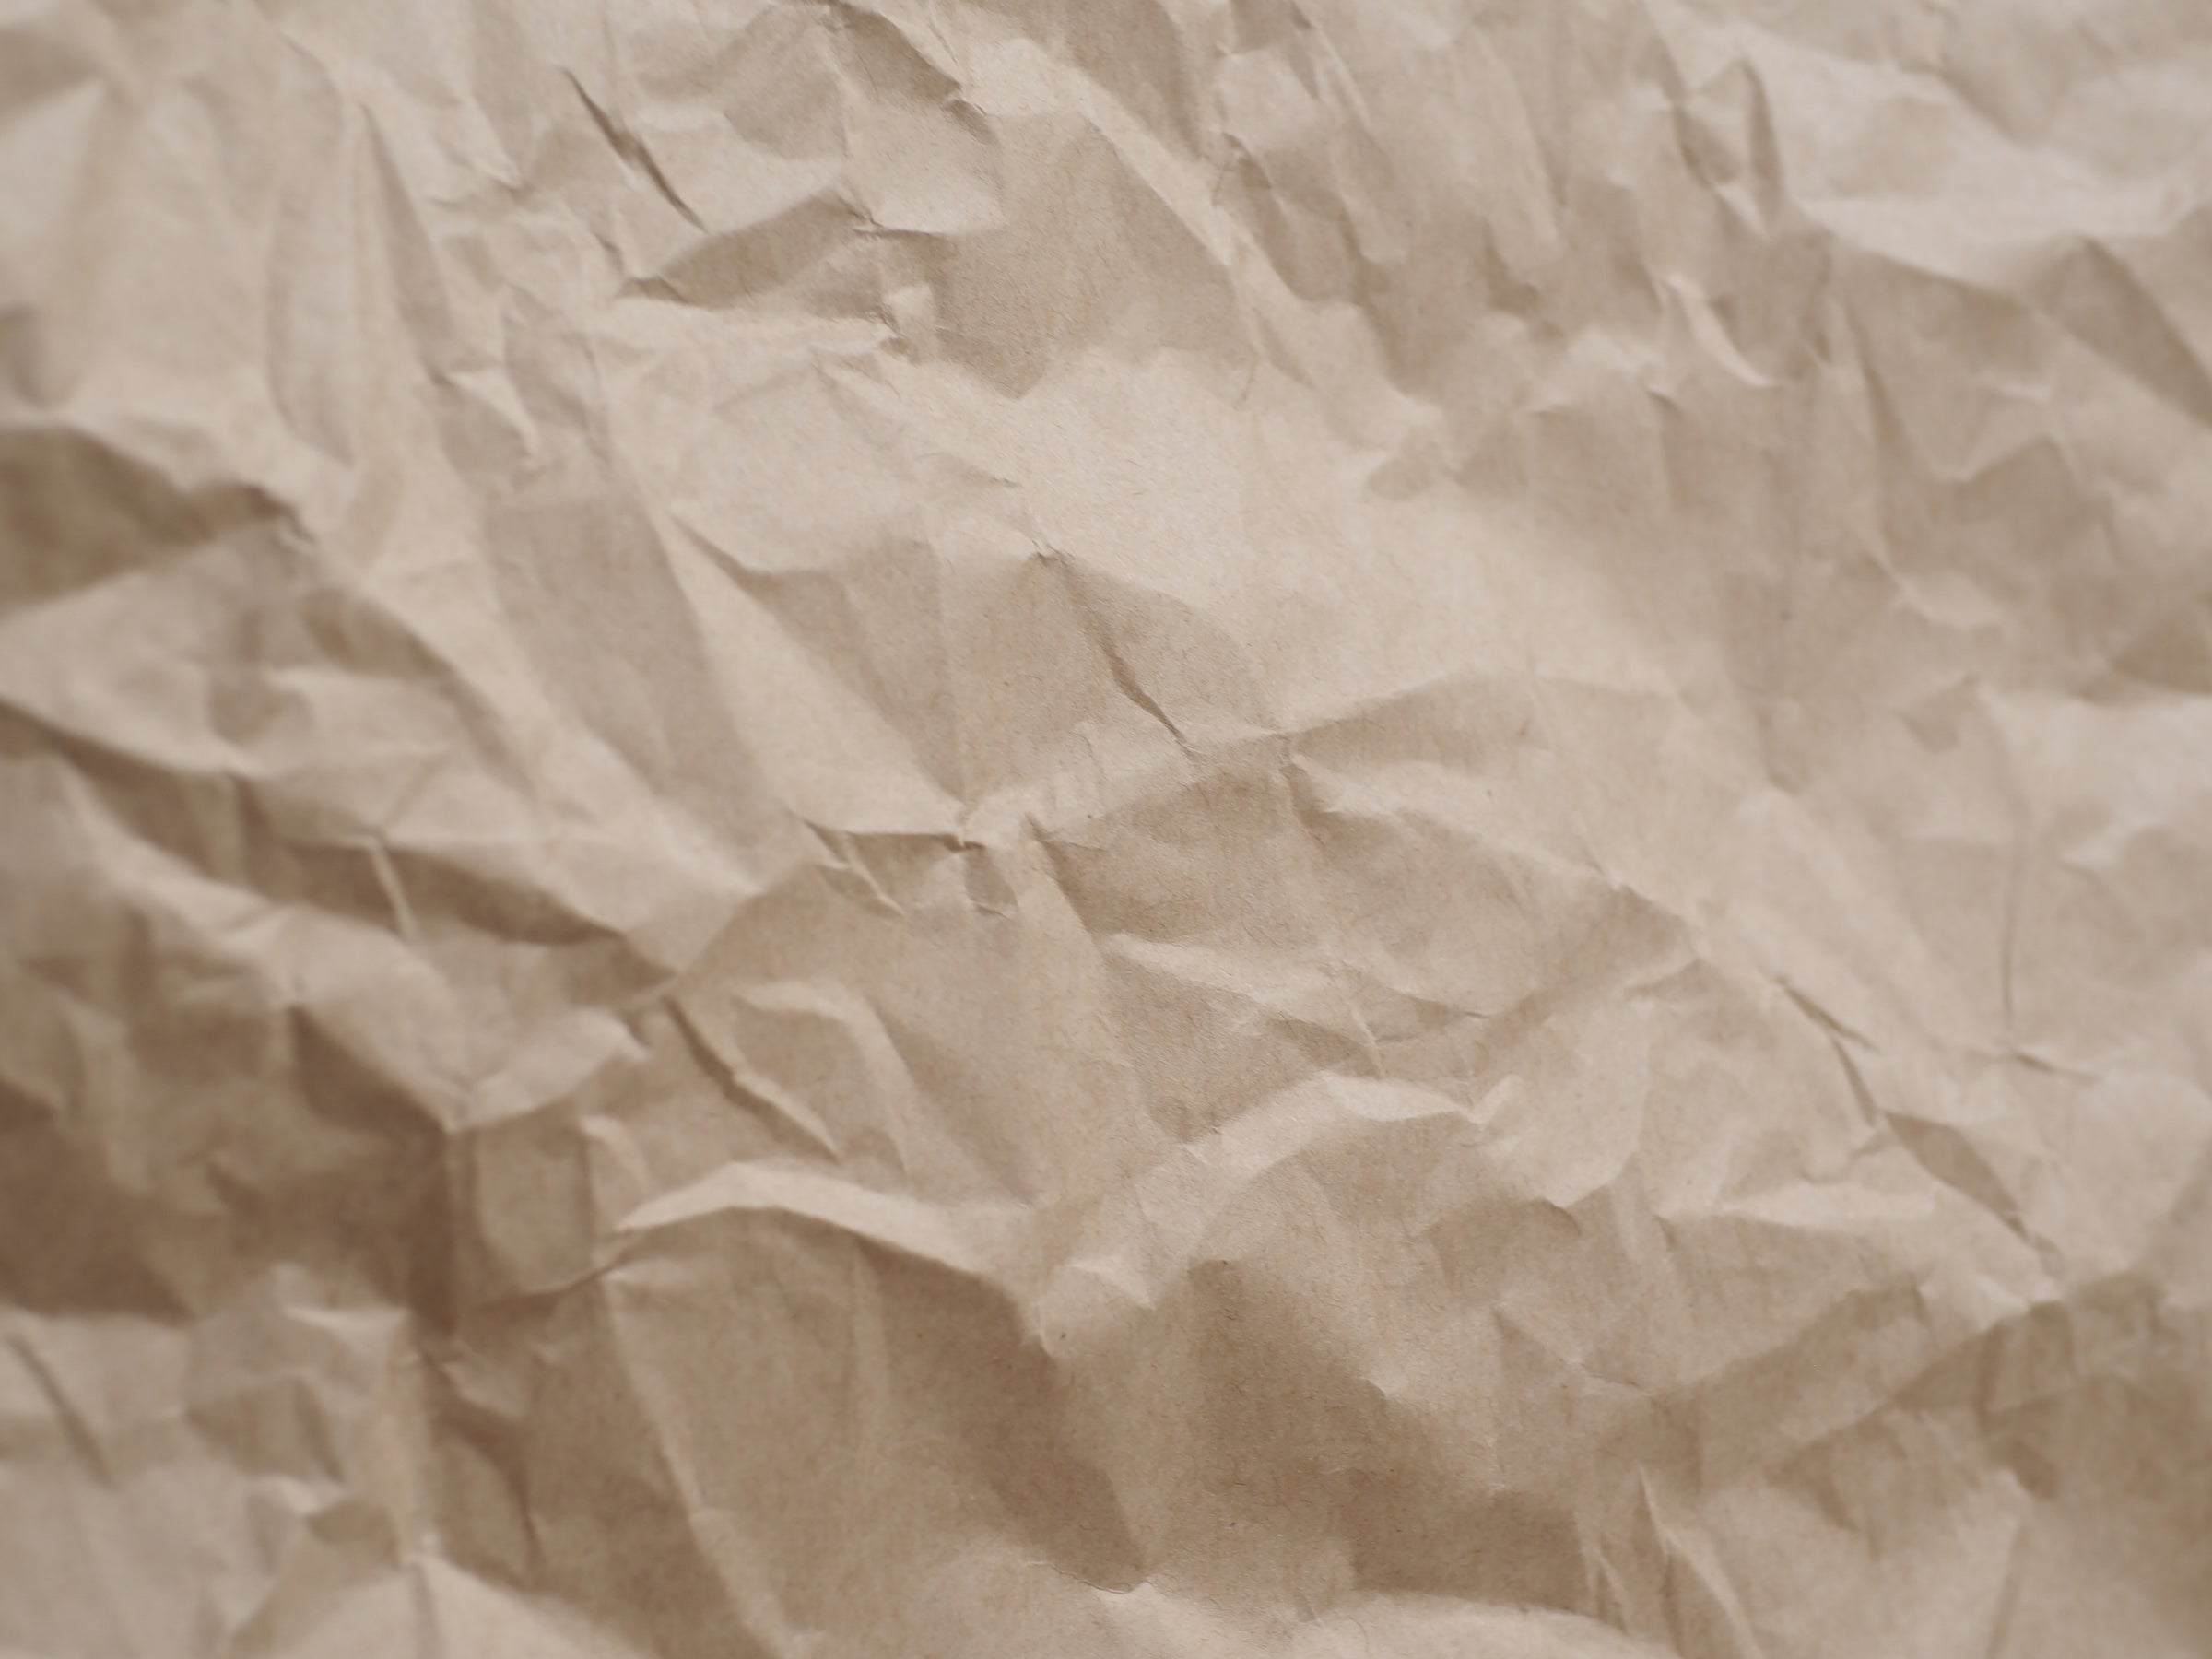 Scrunched up Kraft paper wrapping